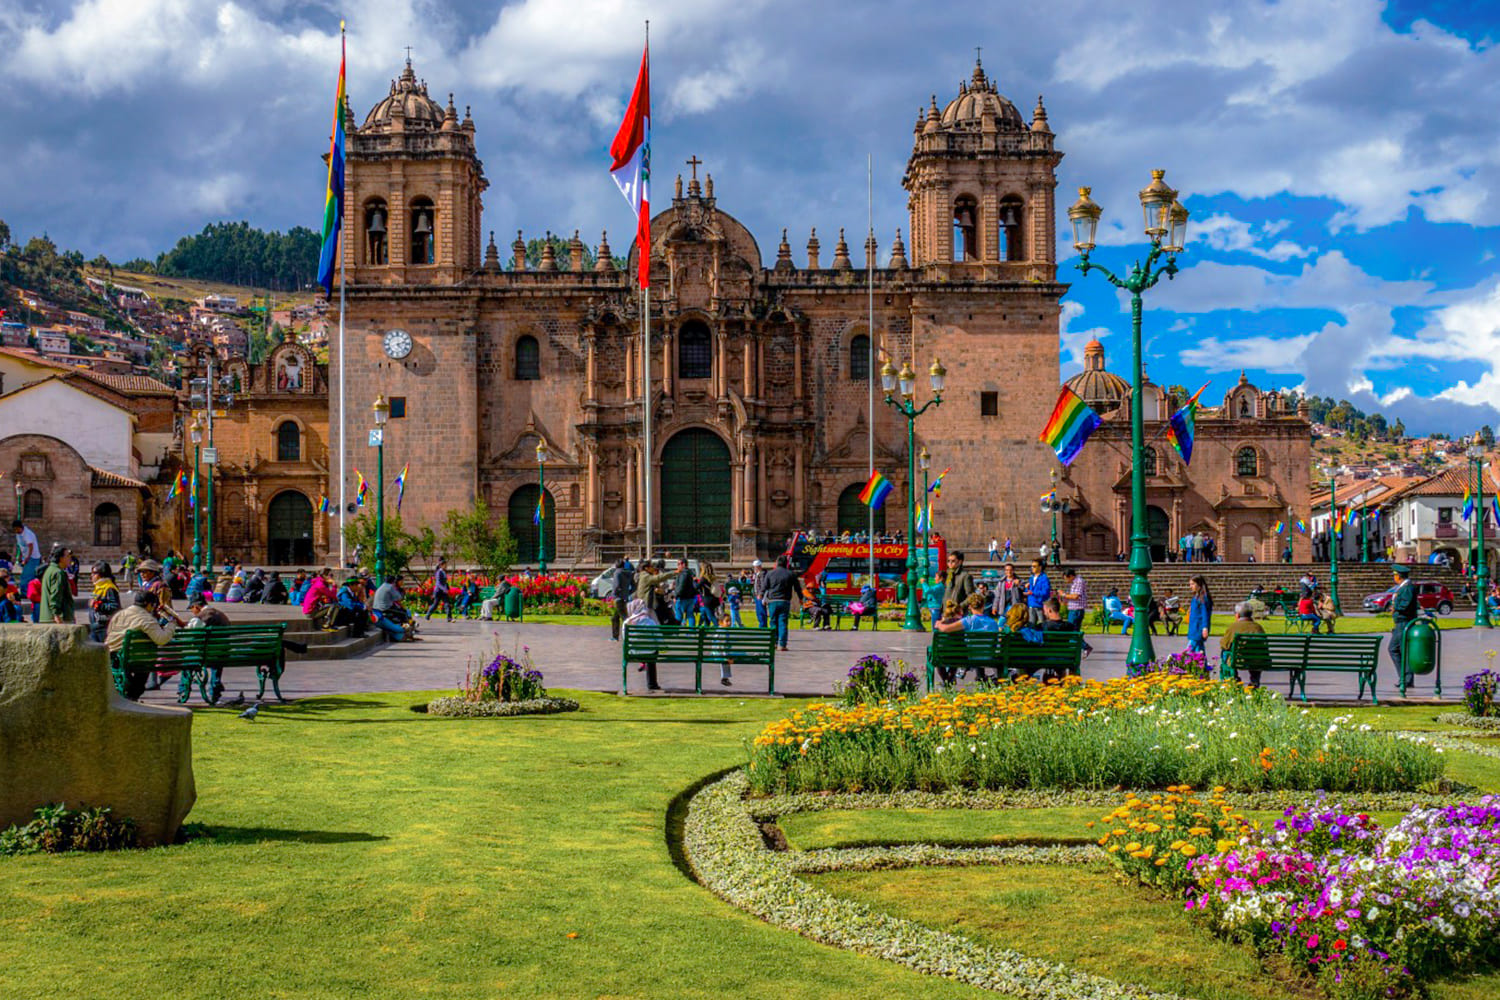 4.- HOW TO SAVE IN CUSCO? - RIDE MUSEUMS AND CHURCHES IN THE CITY